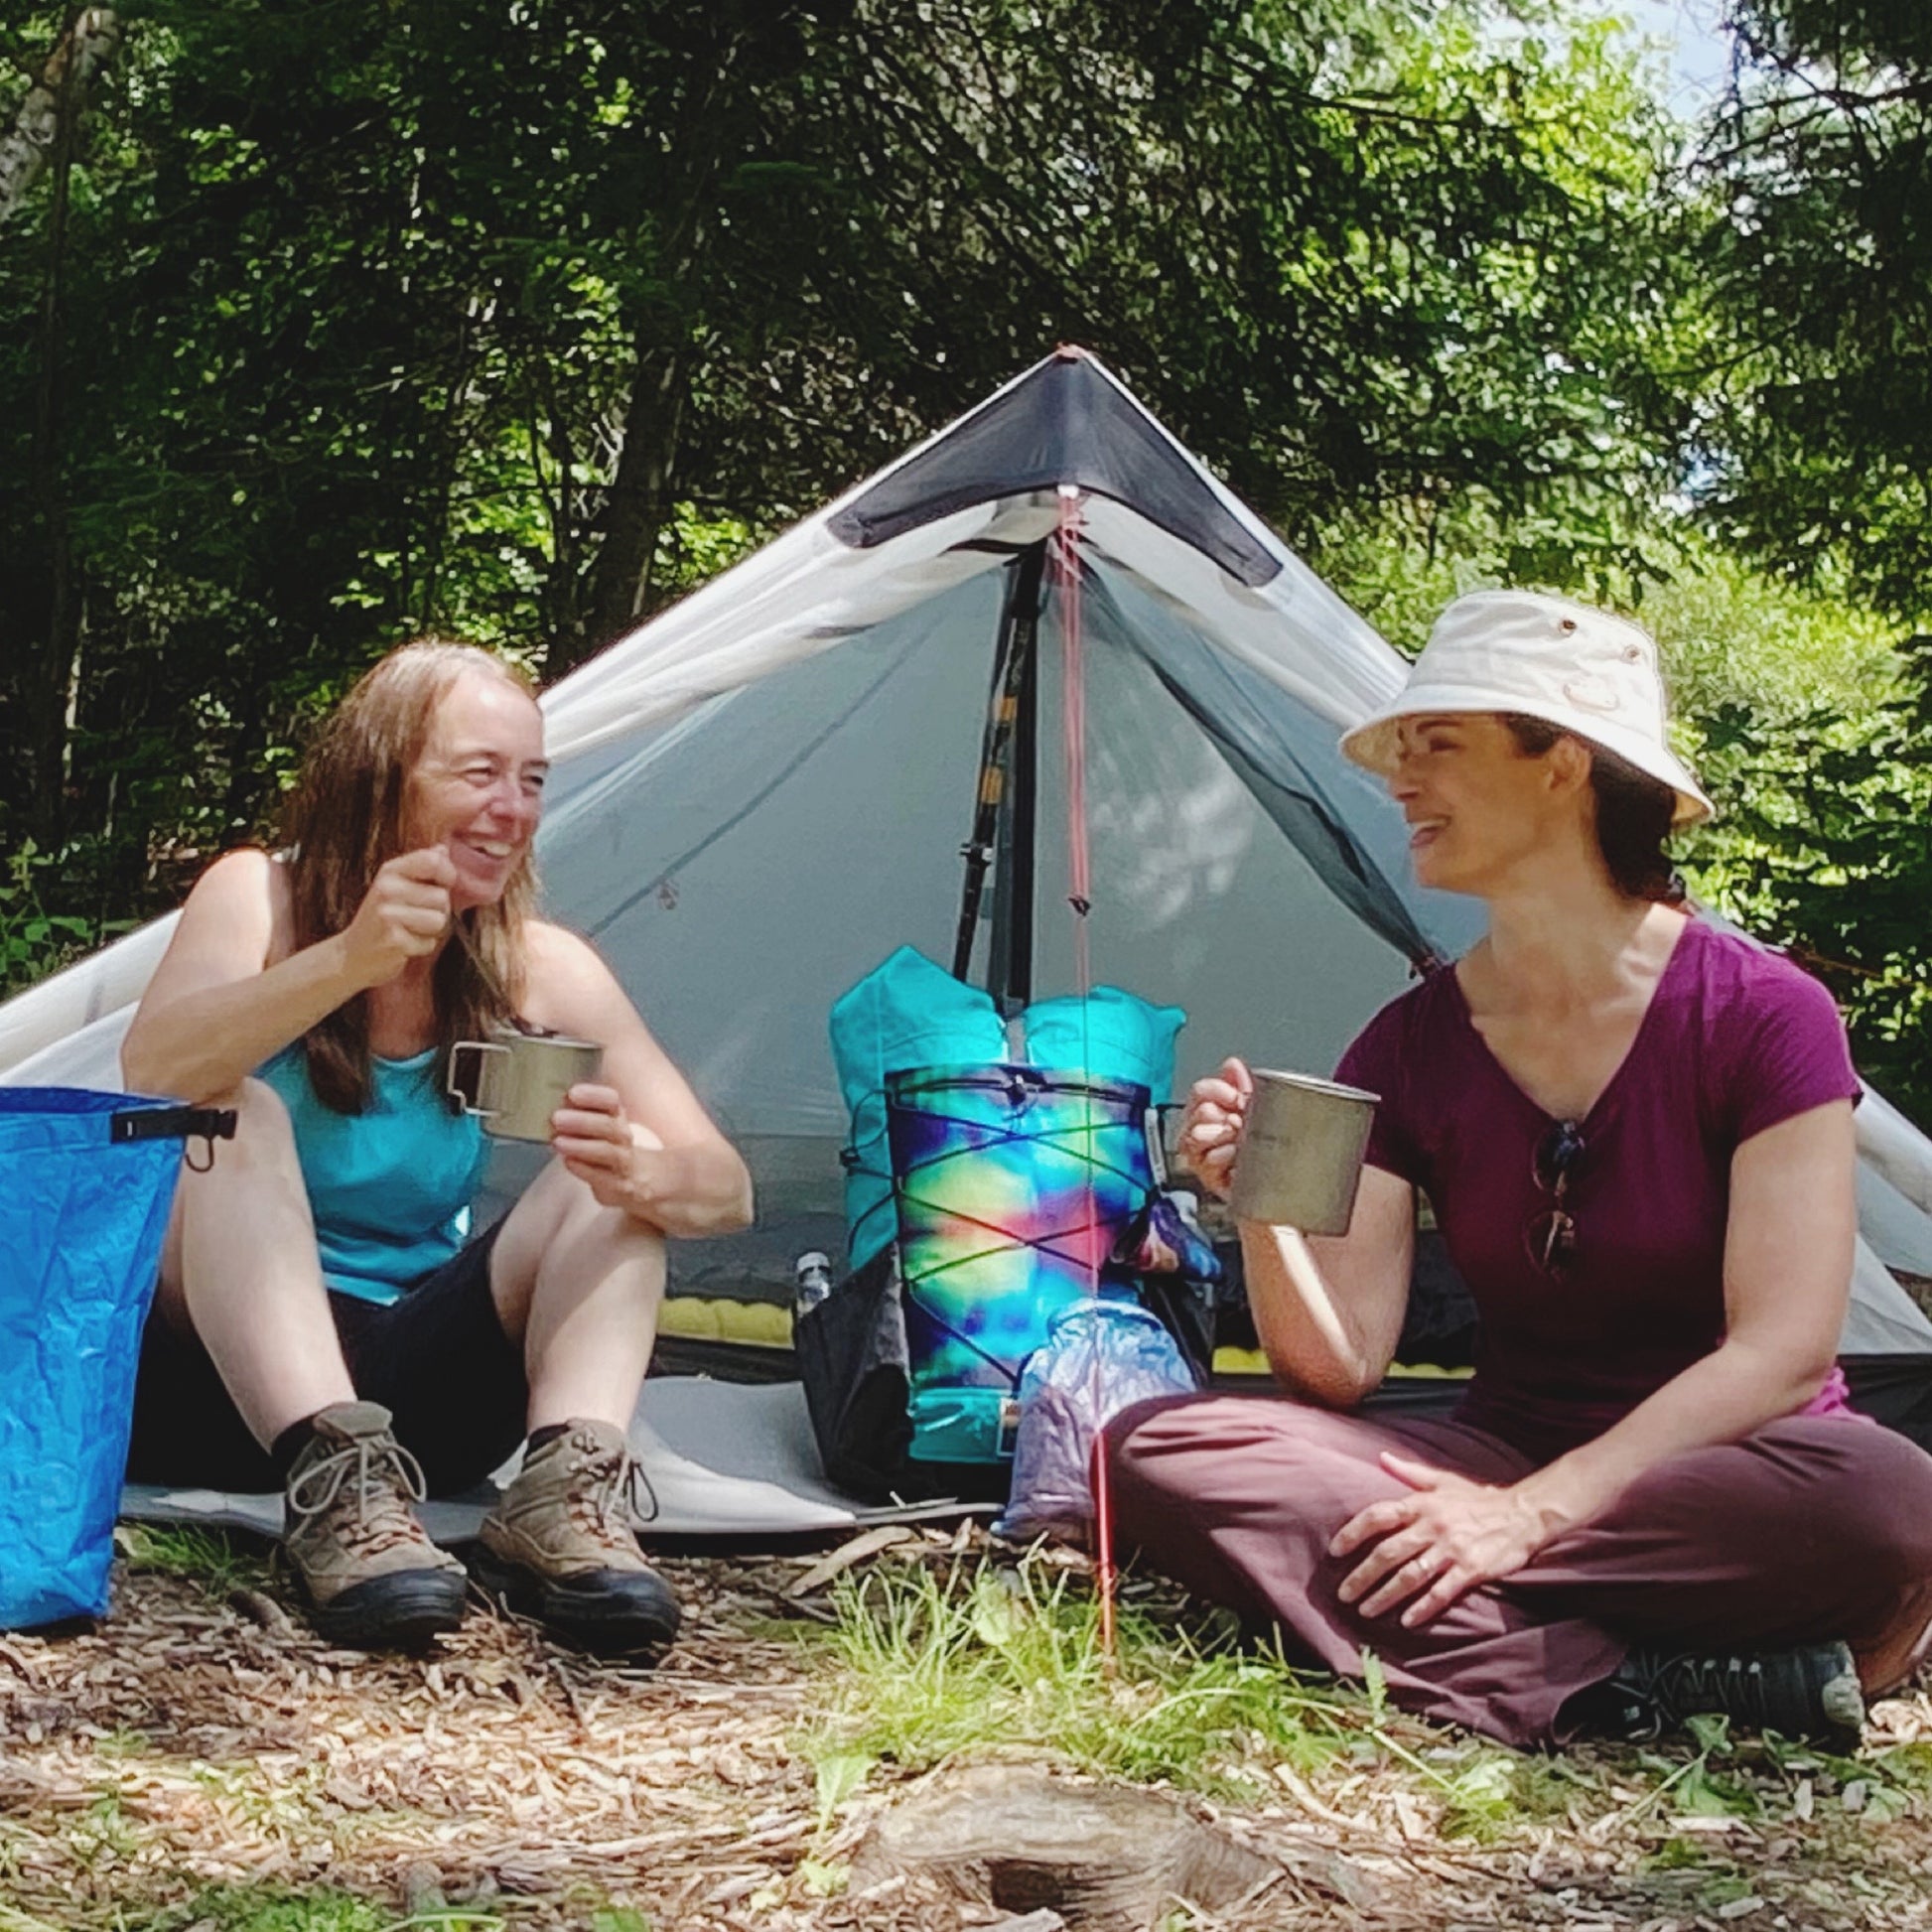 Two women sitting in front of tent drinking/eating out of titanium pots